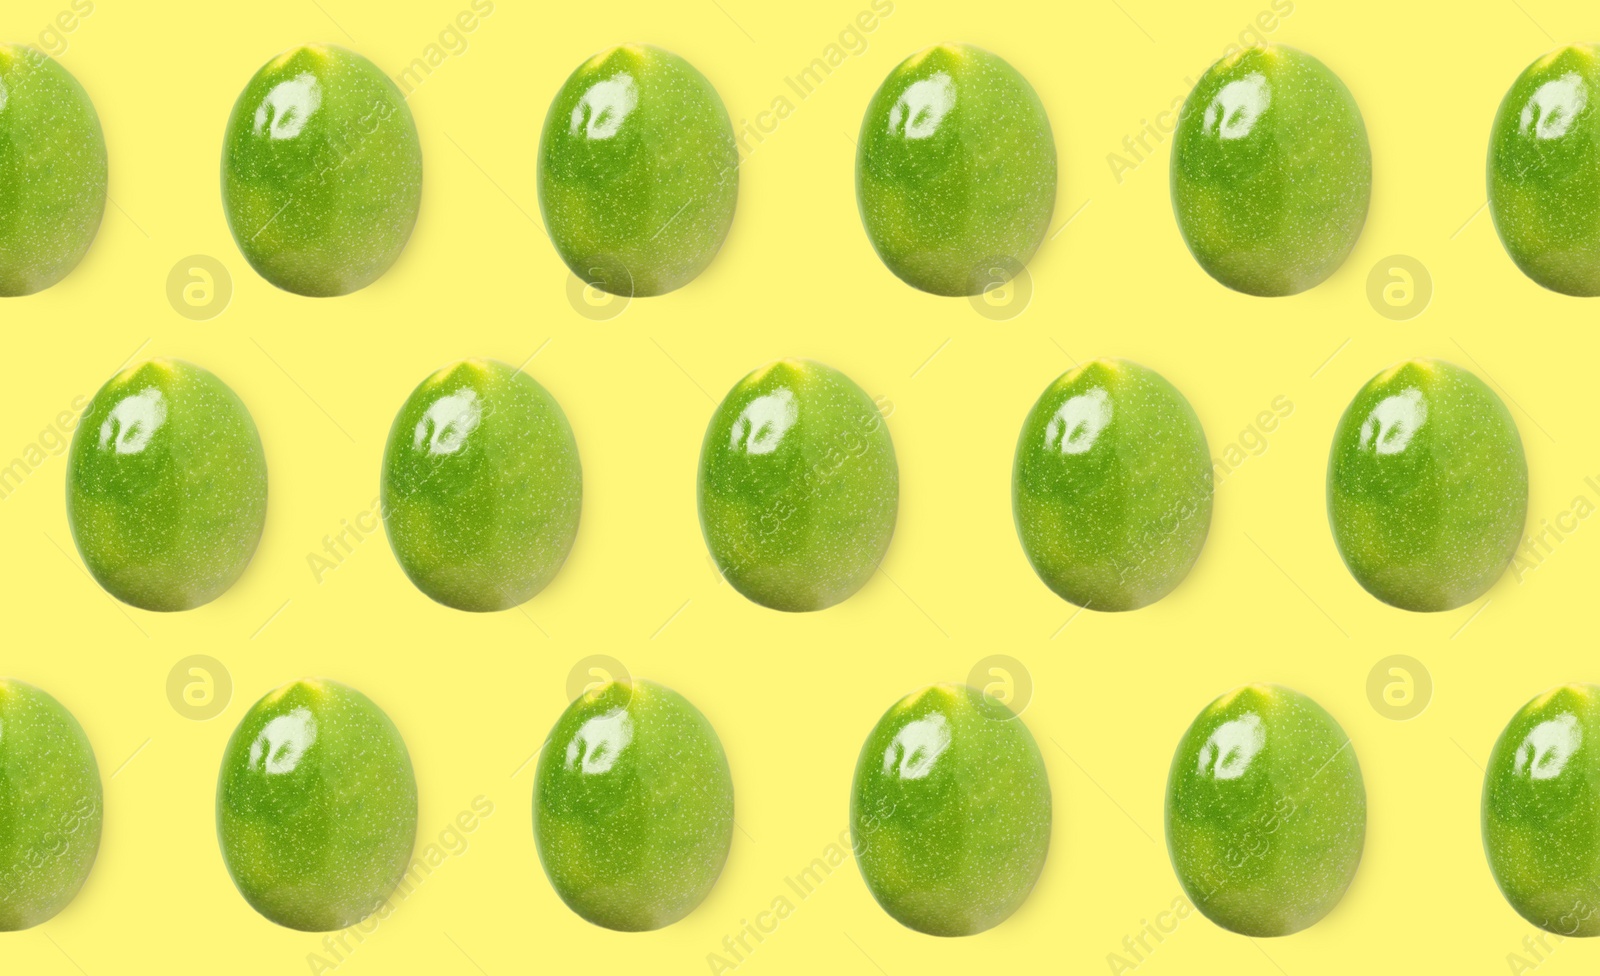 Image of Delicious ripe passion fruits on yellow background, flat lay. Banner design